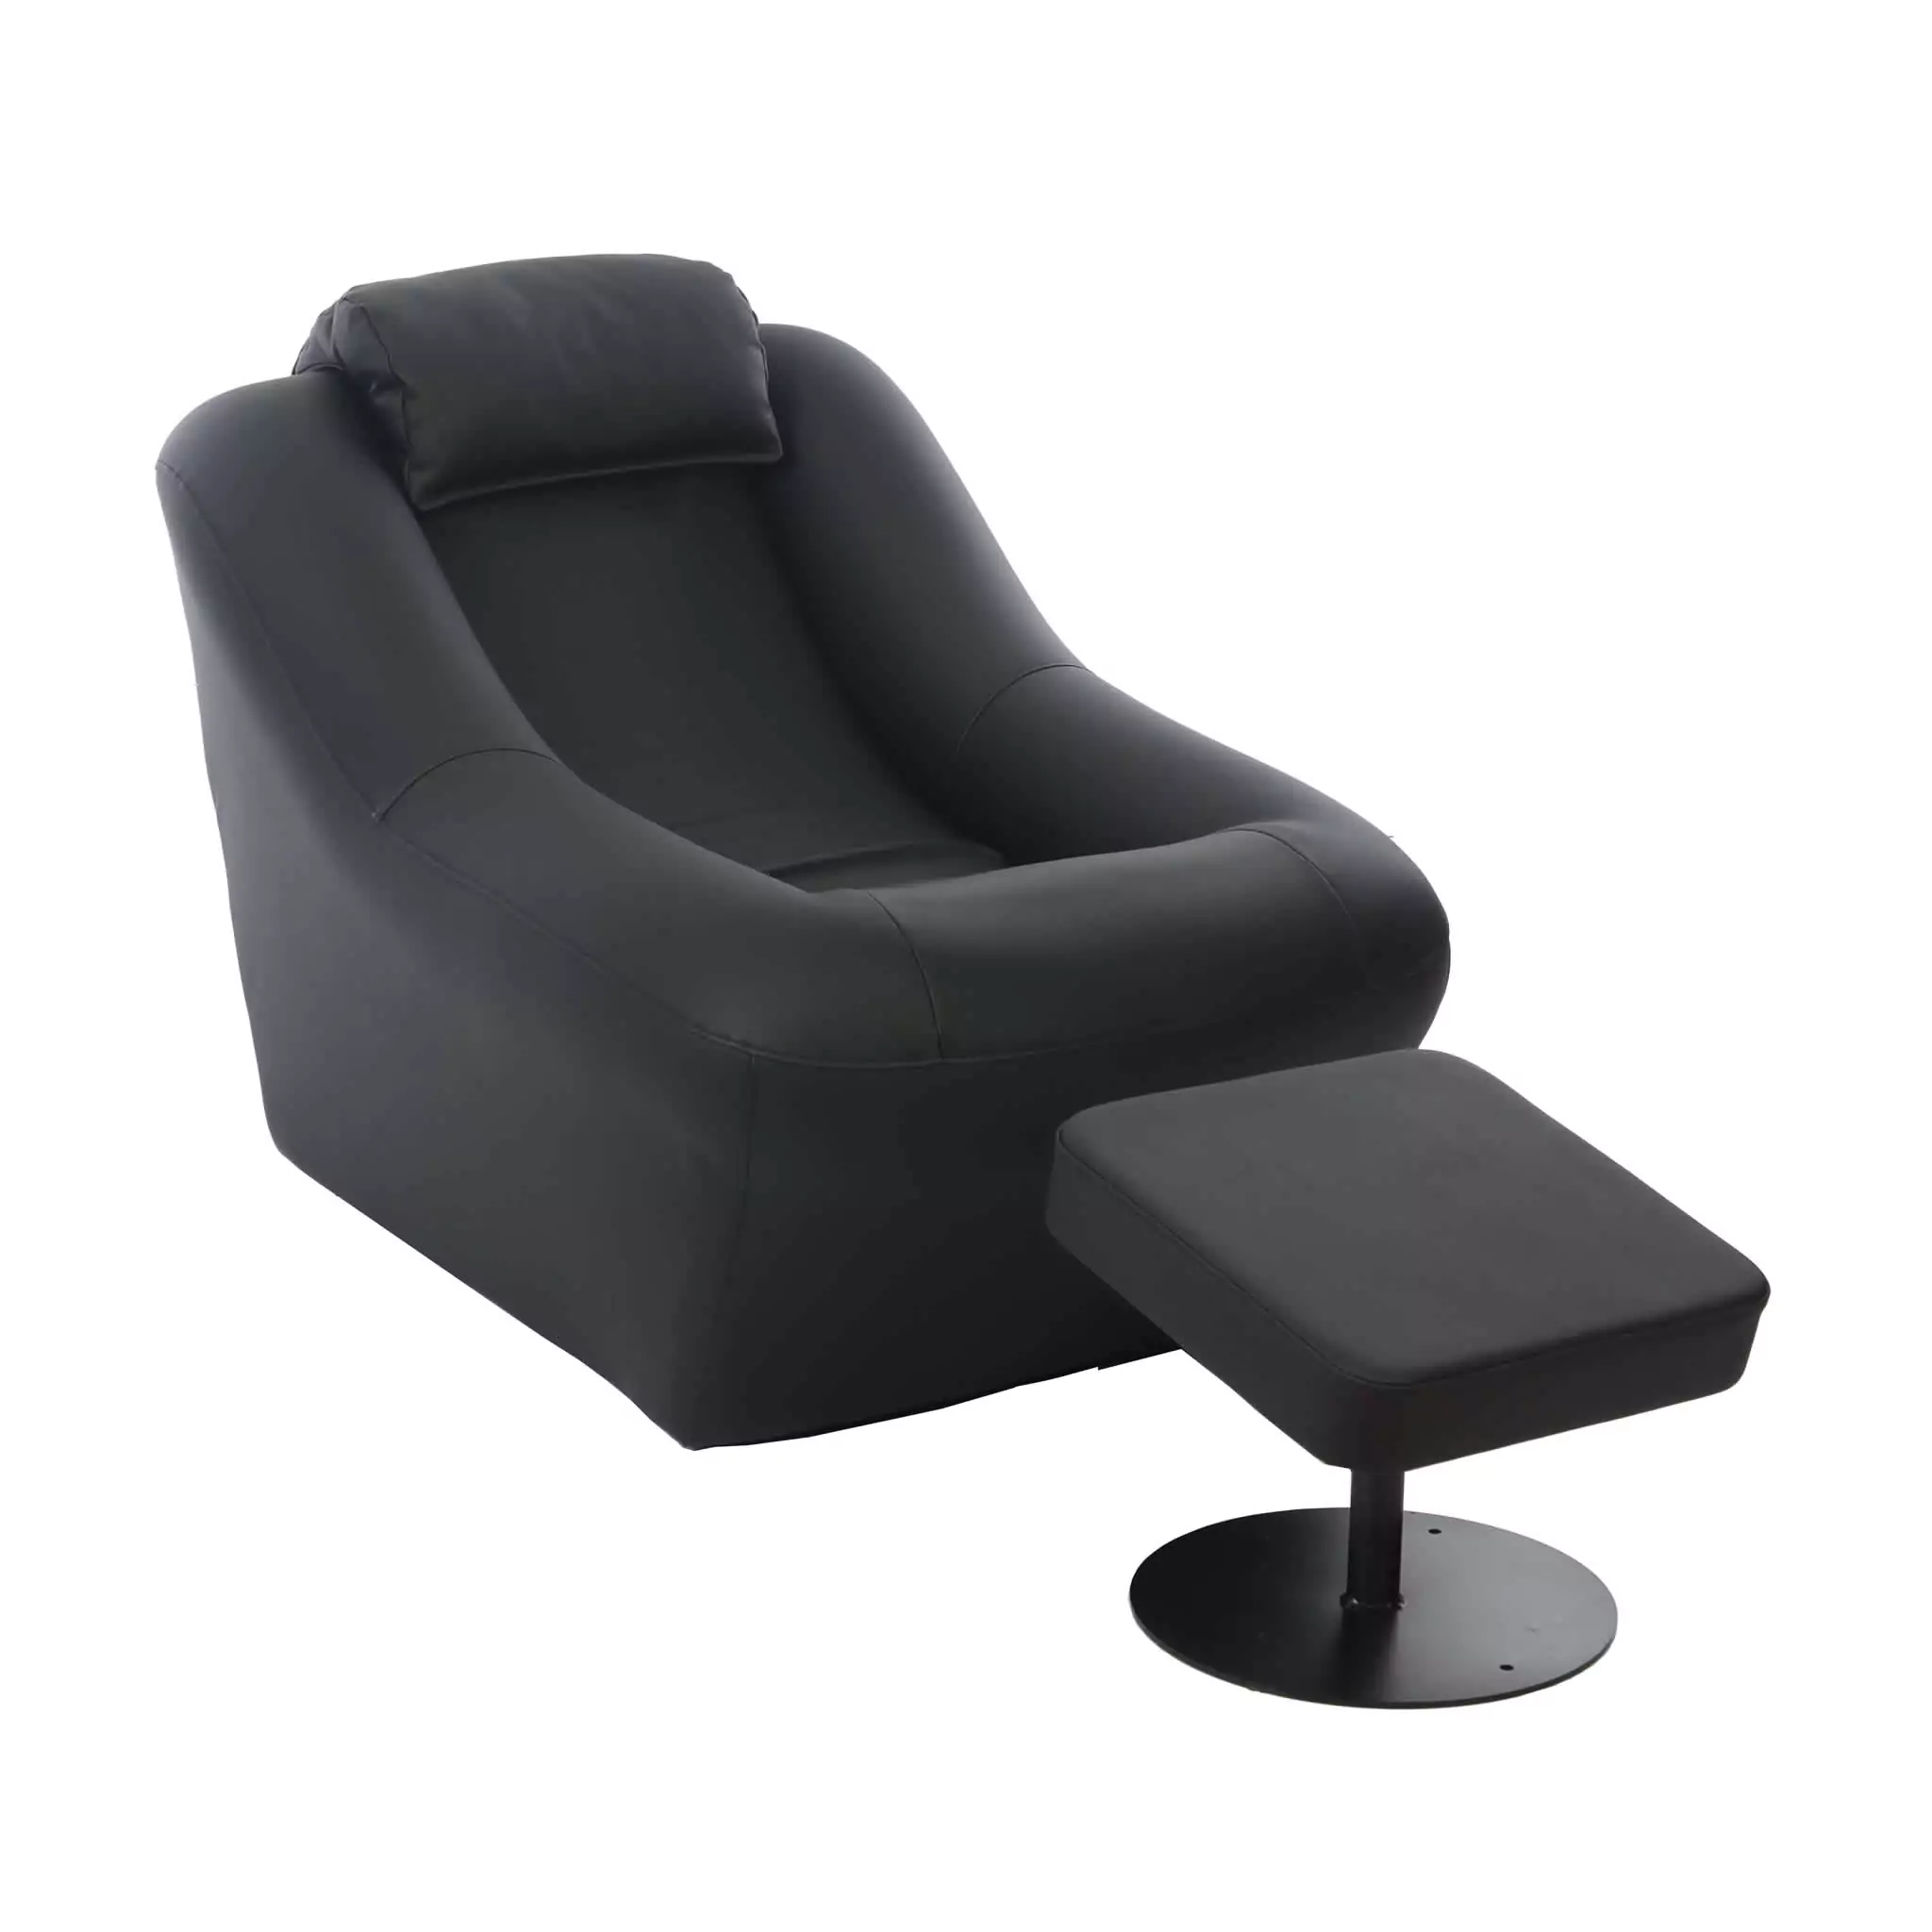 Simko Seating Products Foyer Seat Model 2